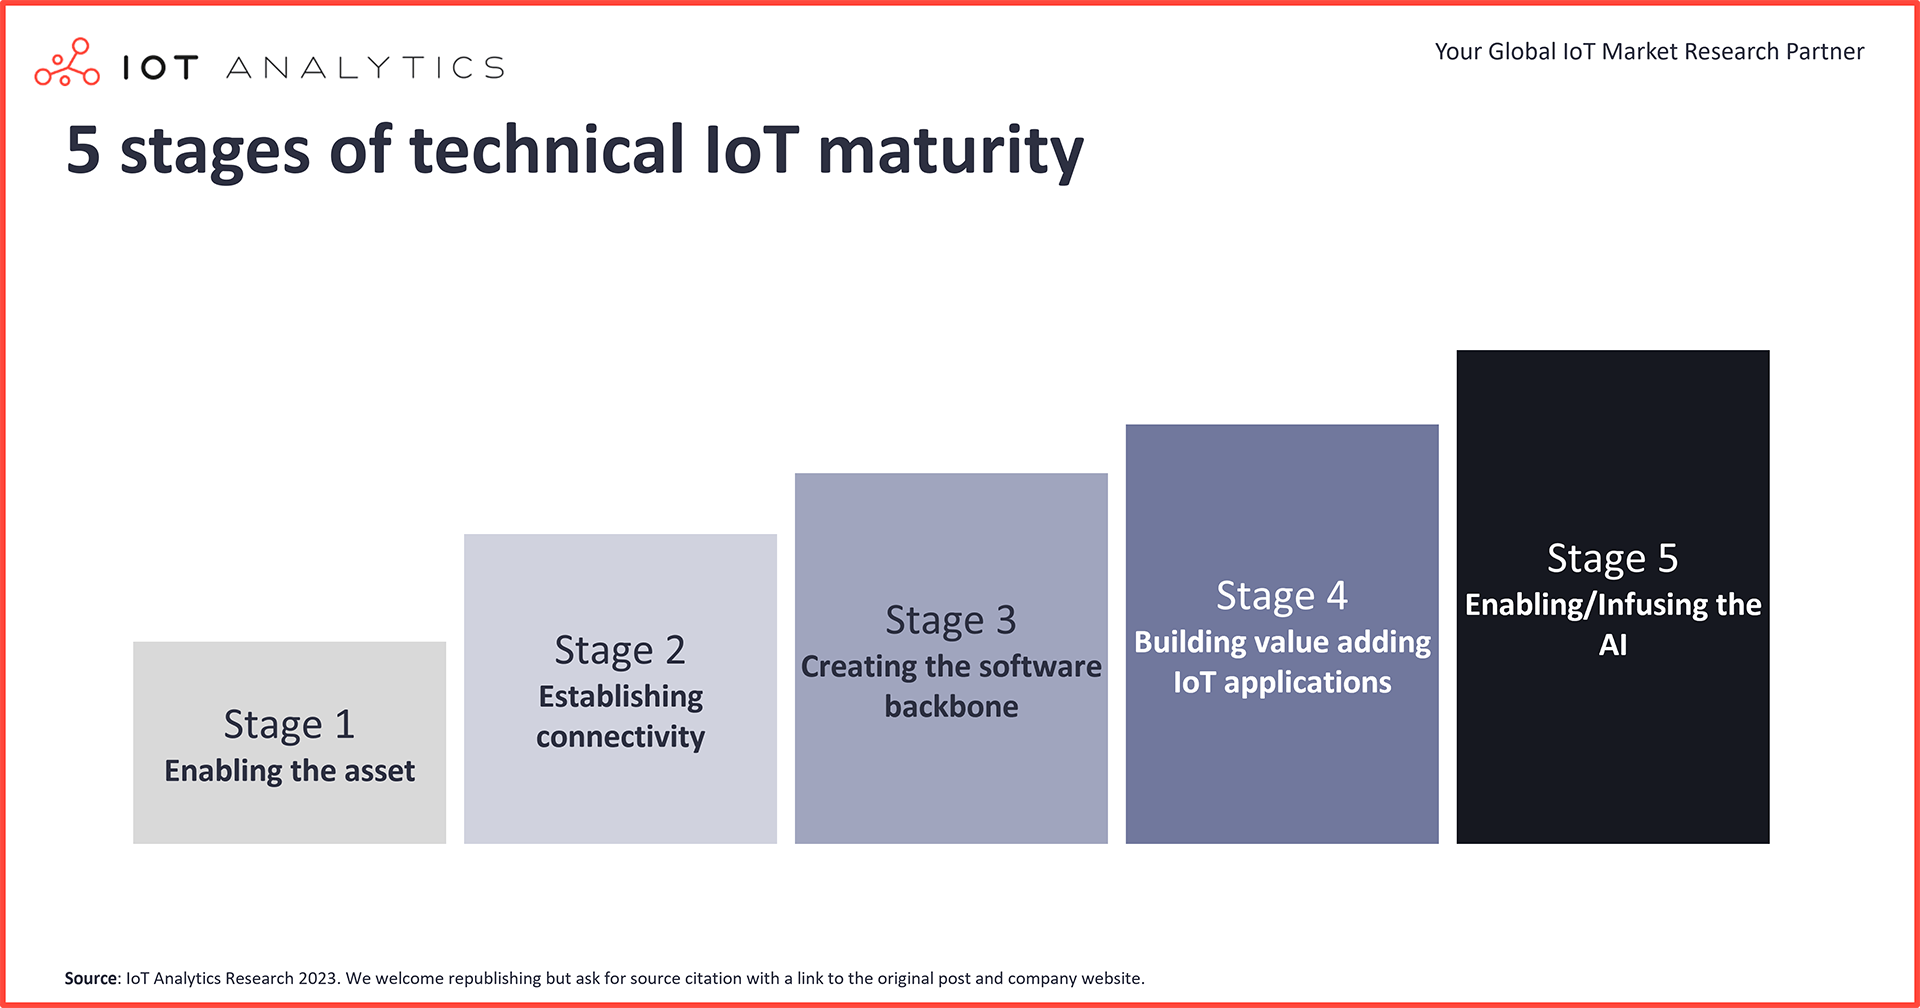 5 stages of technical IoT maturity